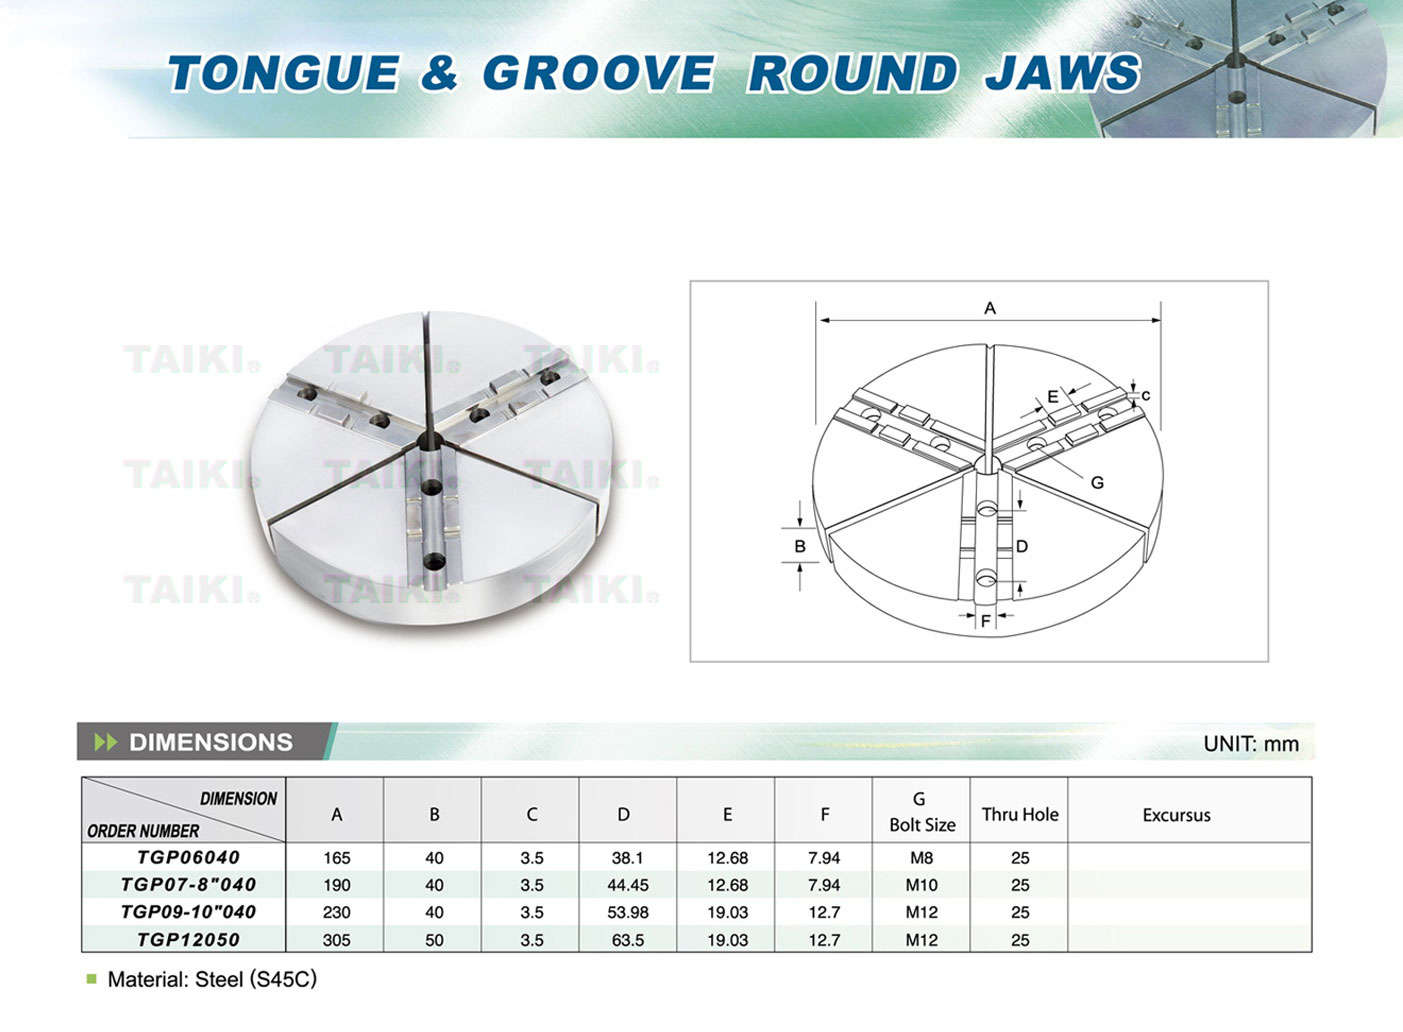 Tongue & Groove Round Jaws